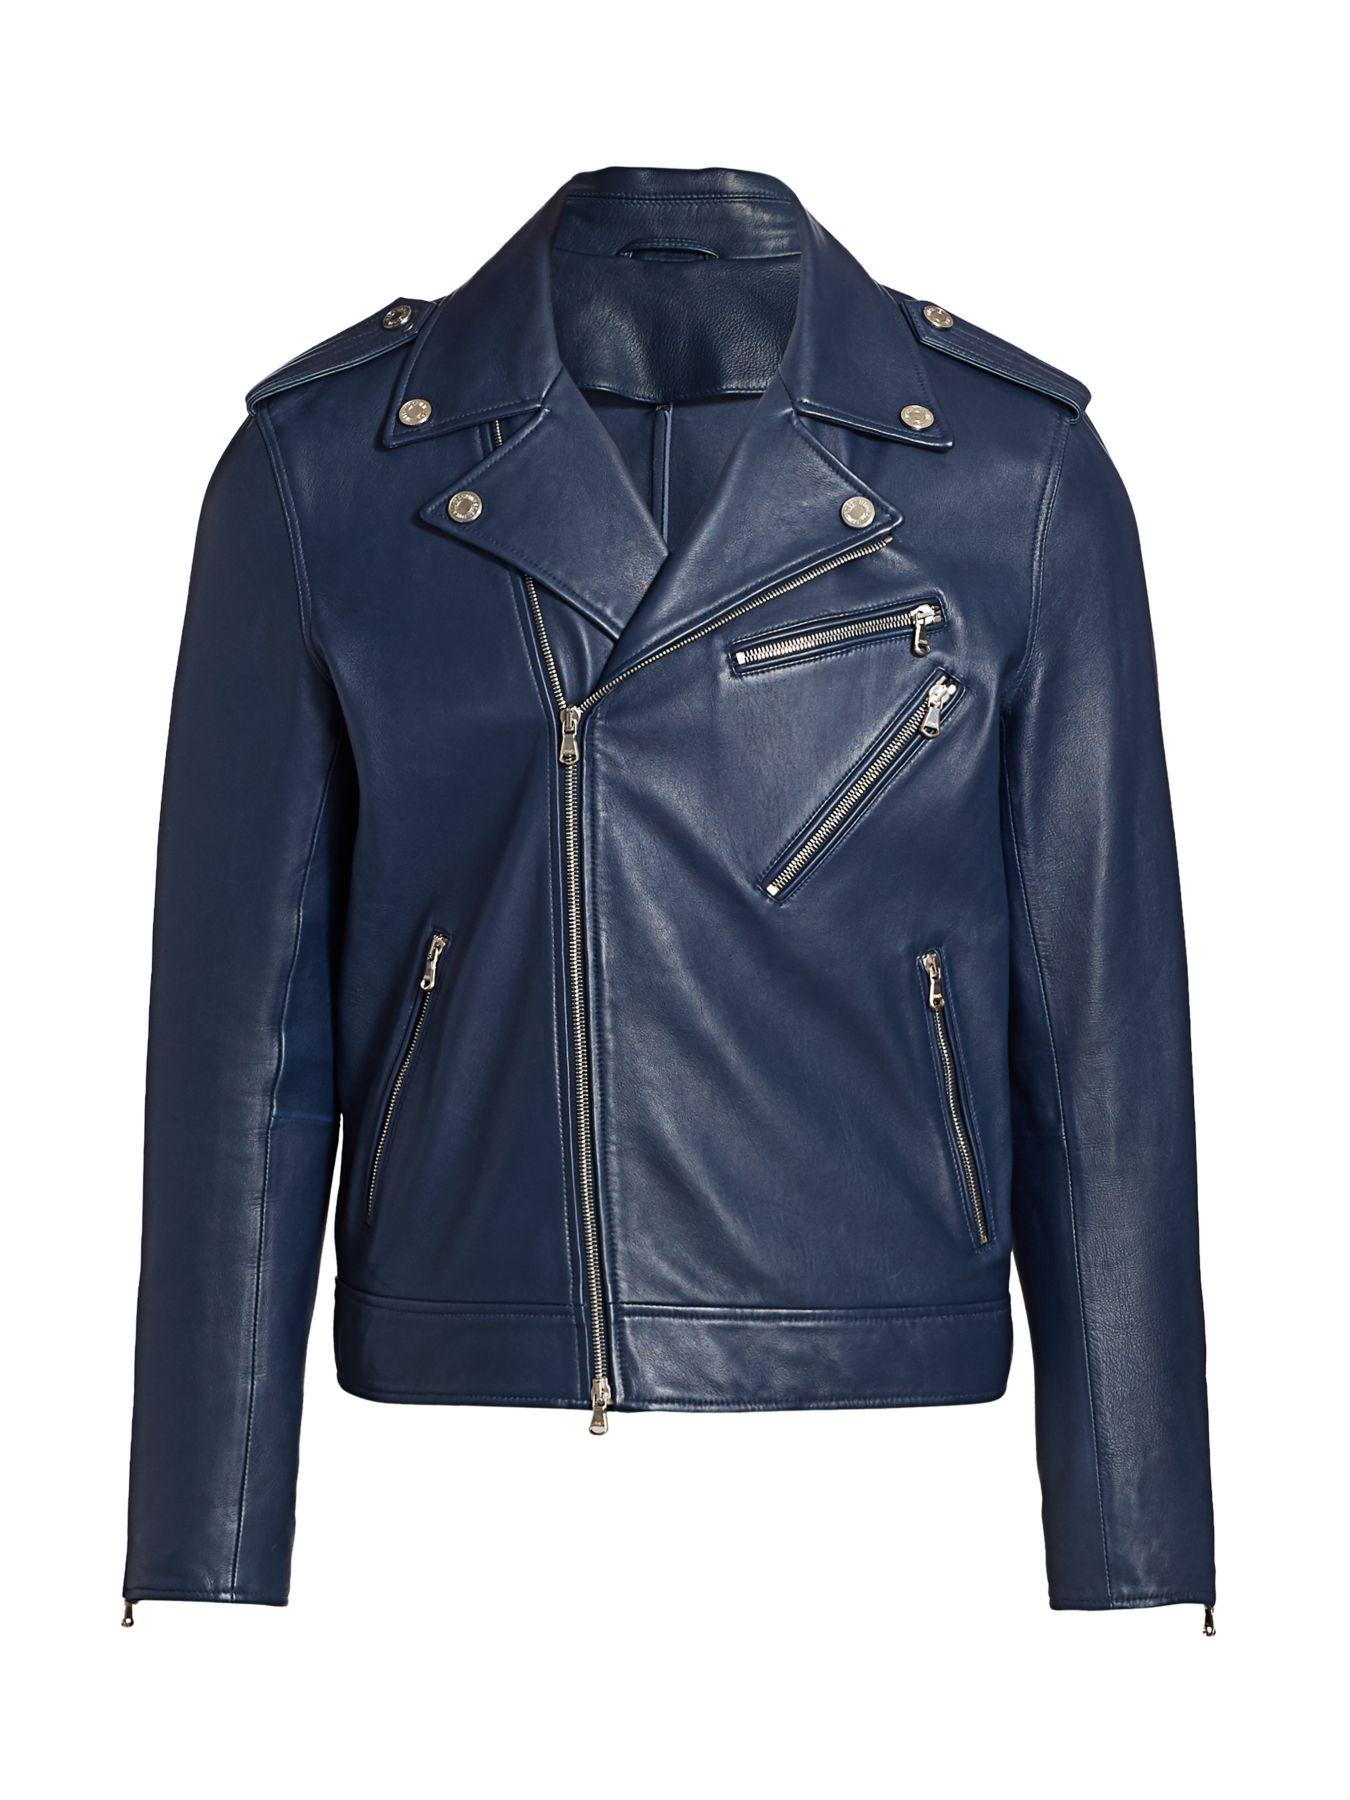 7 For All Mankind Leather Moto Jacket in Navy (Blue) for Men - Lyst